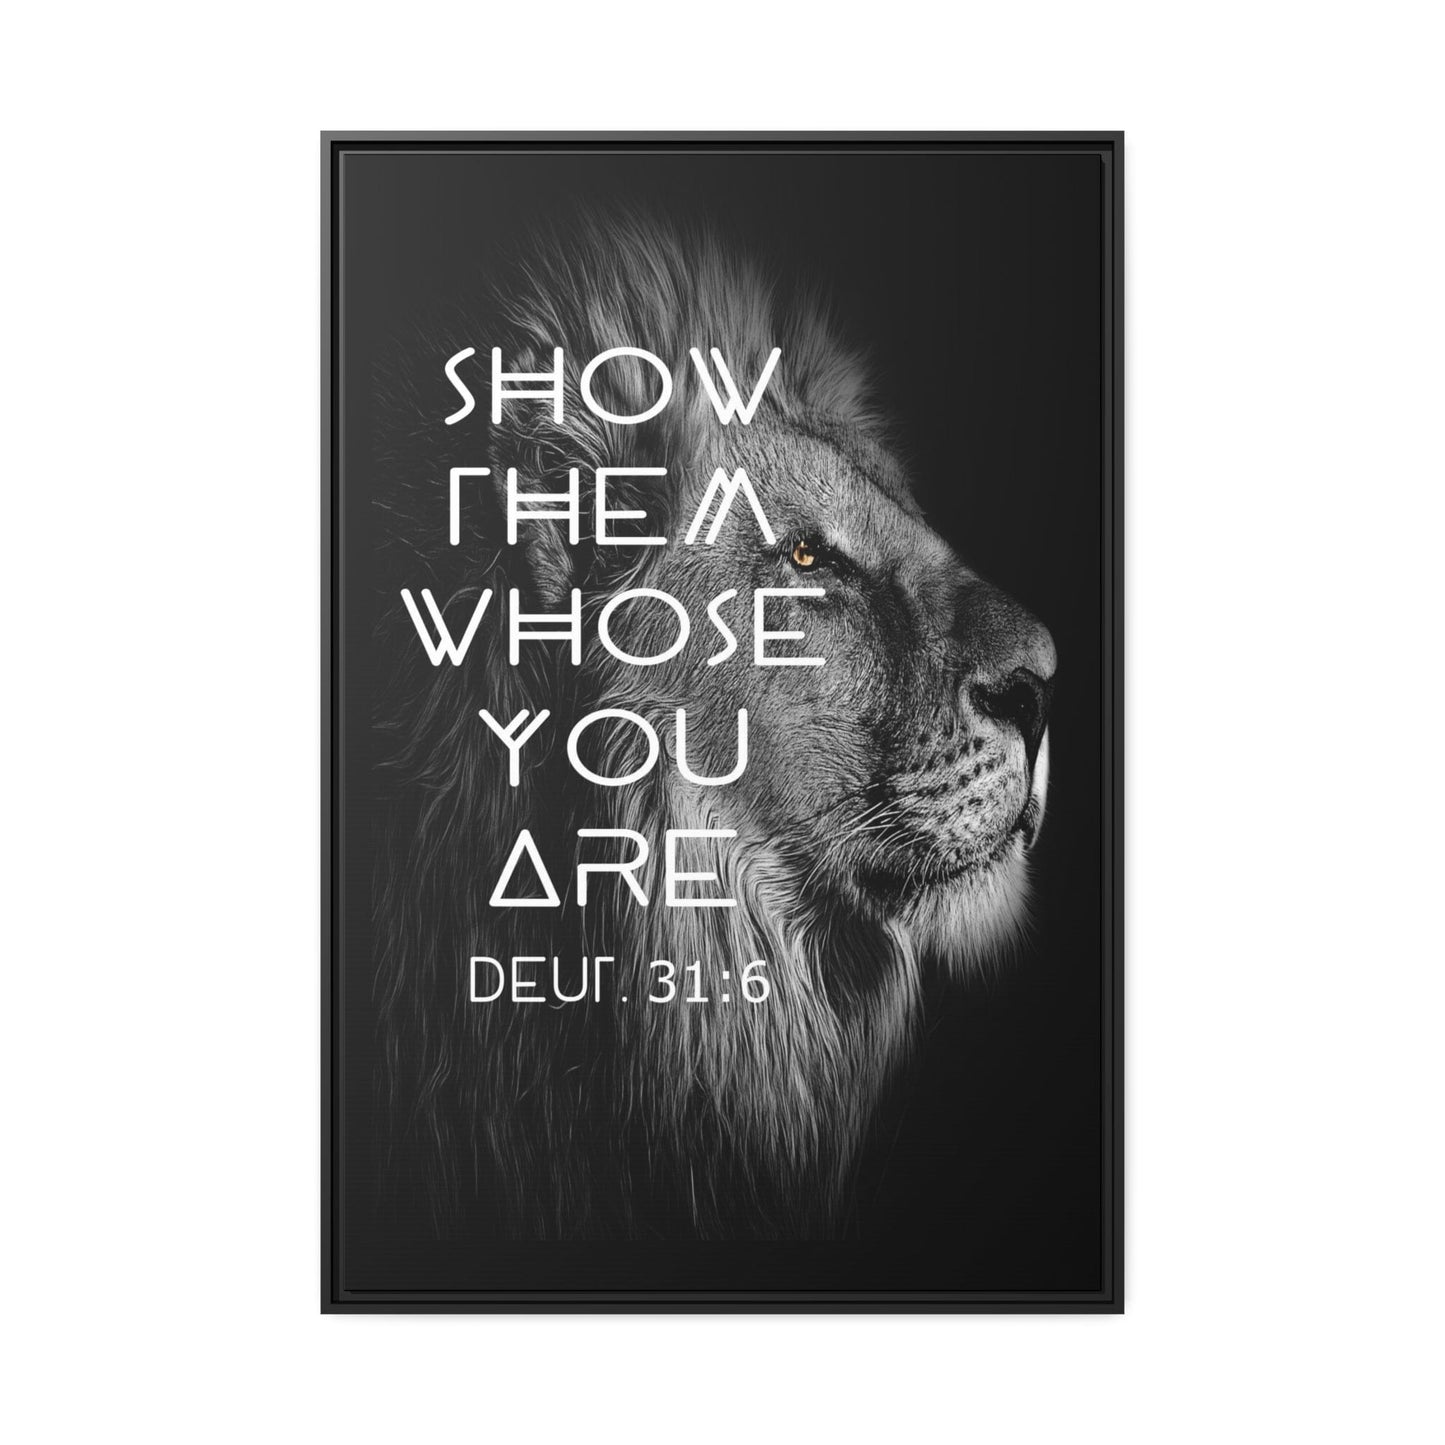 Printify Canvas 32″ x 48″ (Vertical) / Black / 1.25" Show Them Whose You Are - Deuteronomy 31:6 Christian Canvas Wall Art